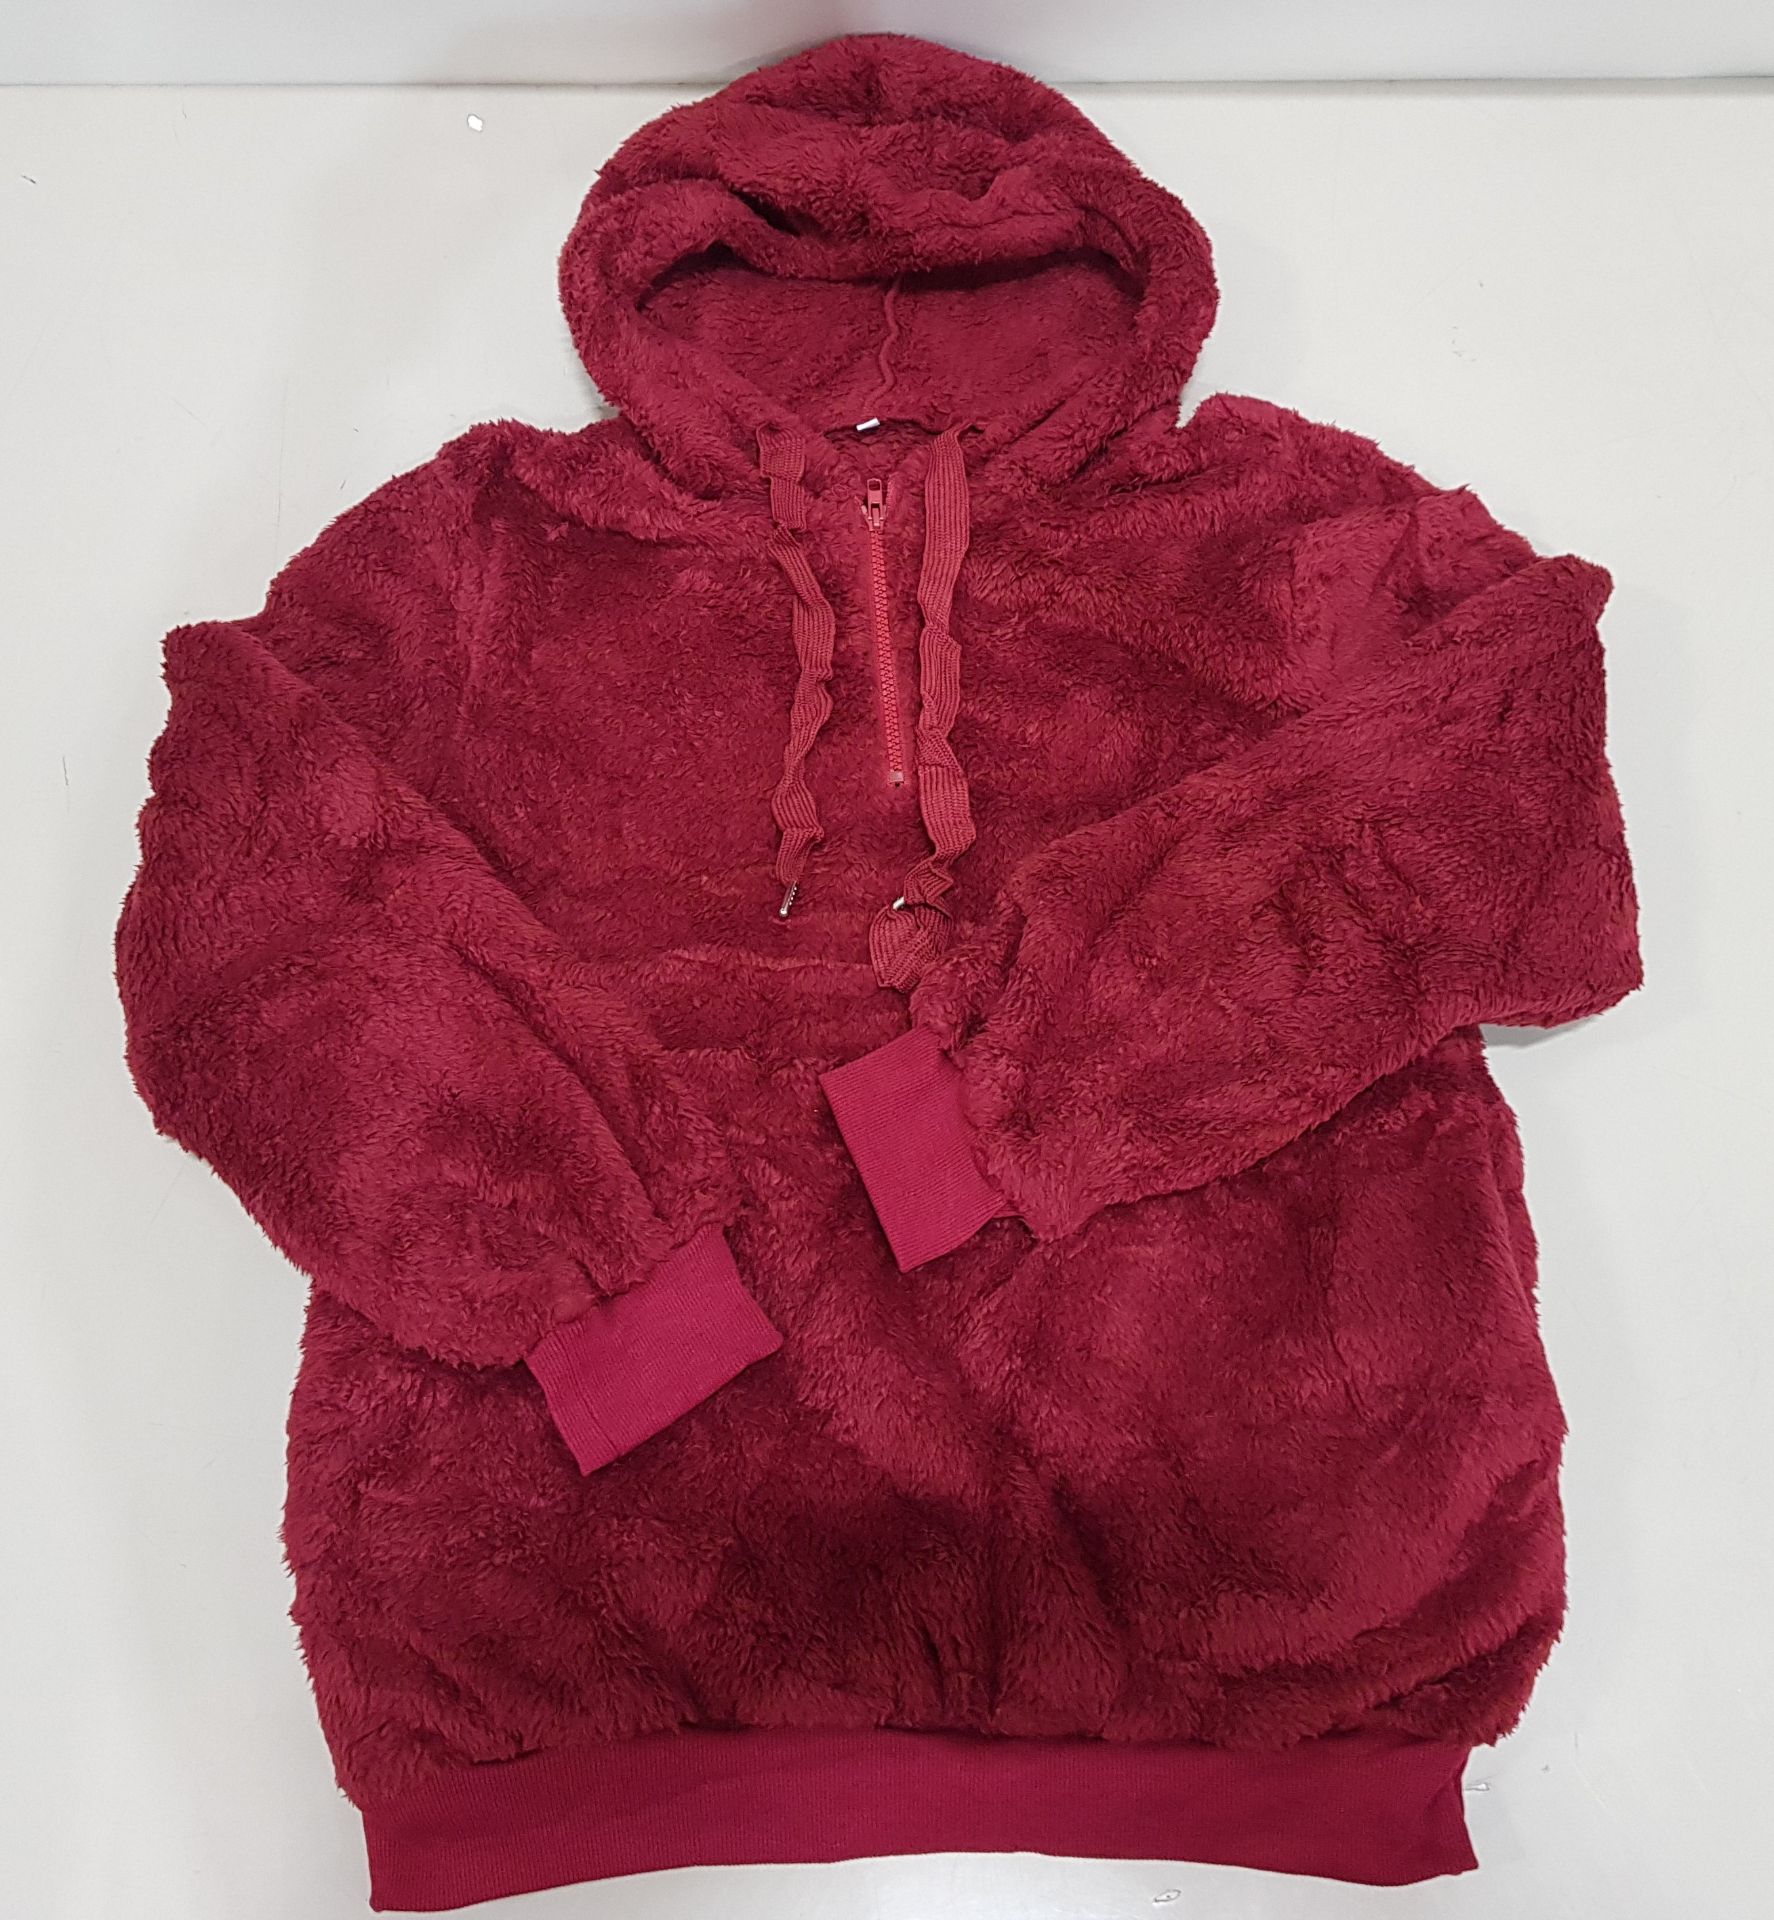 20 X BRAND NEW BWIV WOMANS BAGGY FLUFFY QUARTER ZIP FLEECES - ALL IN DARK RED - ALL IN SIZE UK M -